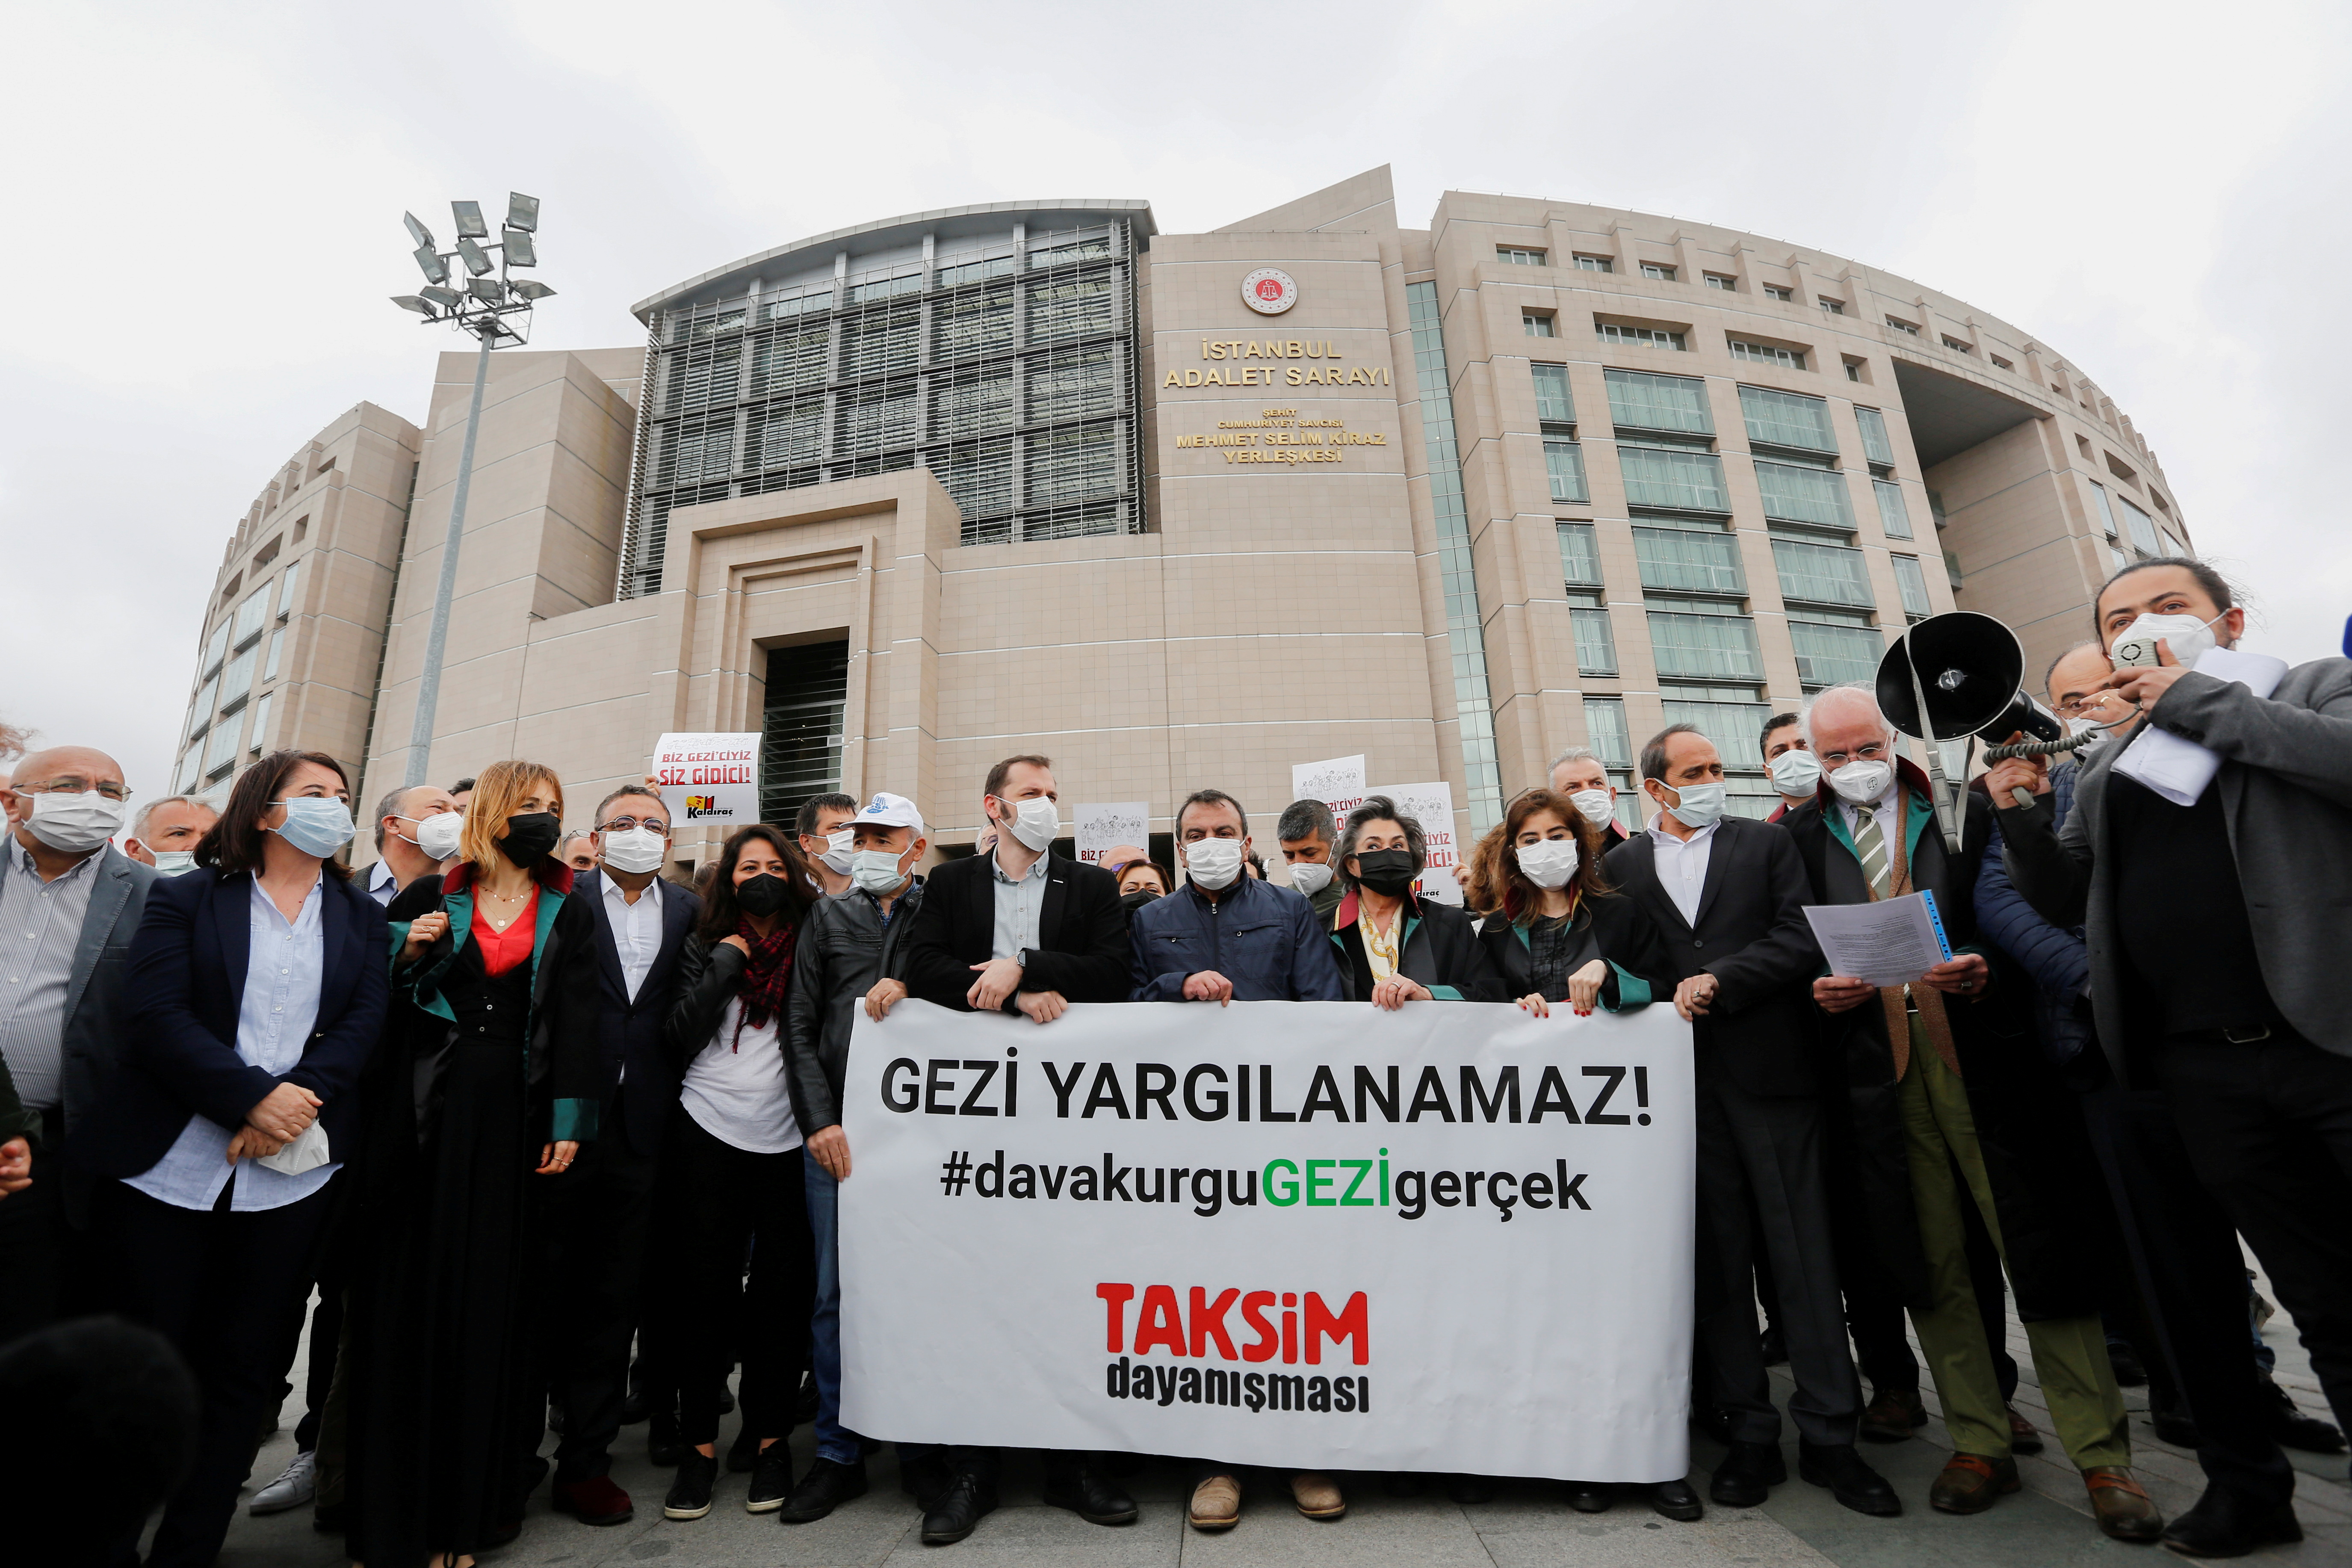 Lawyers and opposition lawmakers gather in front of the Justice Palace, the Caglayan Courthouse, as a Turkish court began the re-trial of philanthropist Osman Kavala and 15 others over their role in nationwide protests in 2013, in Istanbul, Turkey, May 21, 2021. The banner reads: 